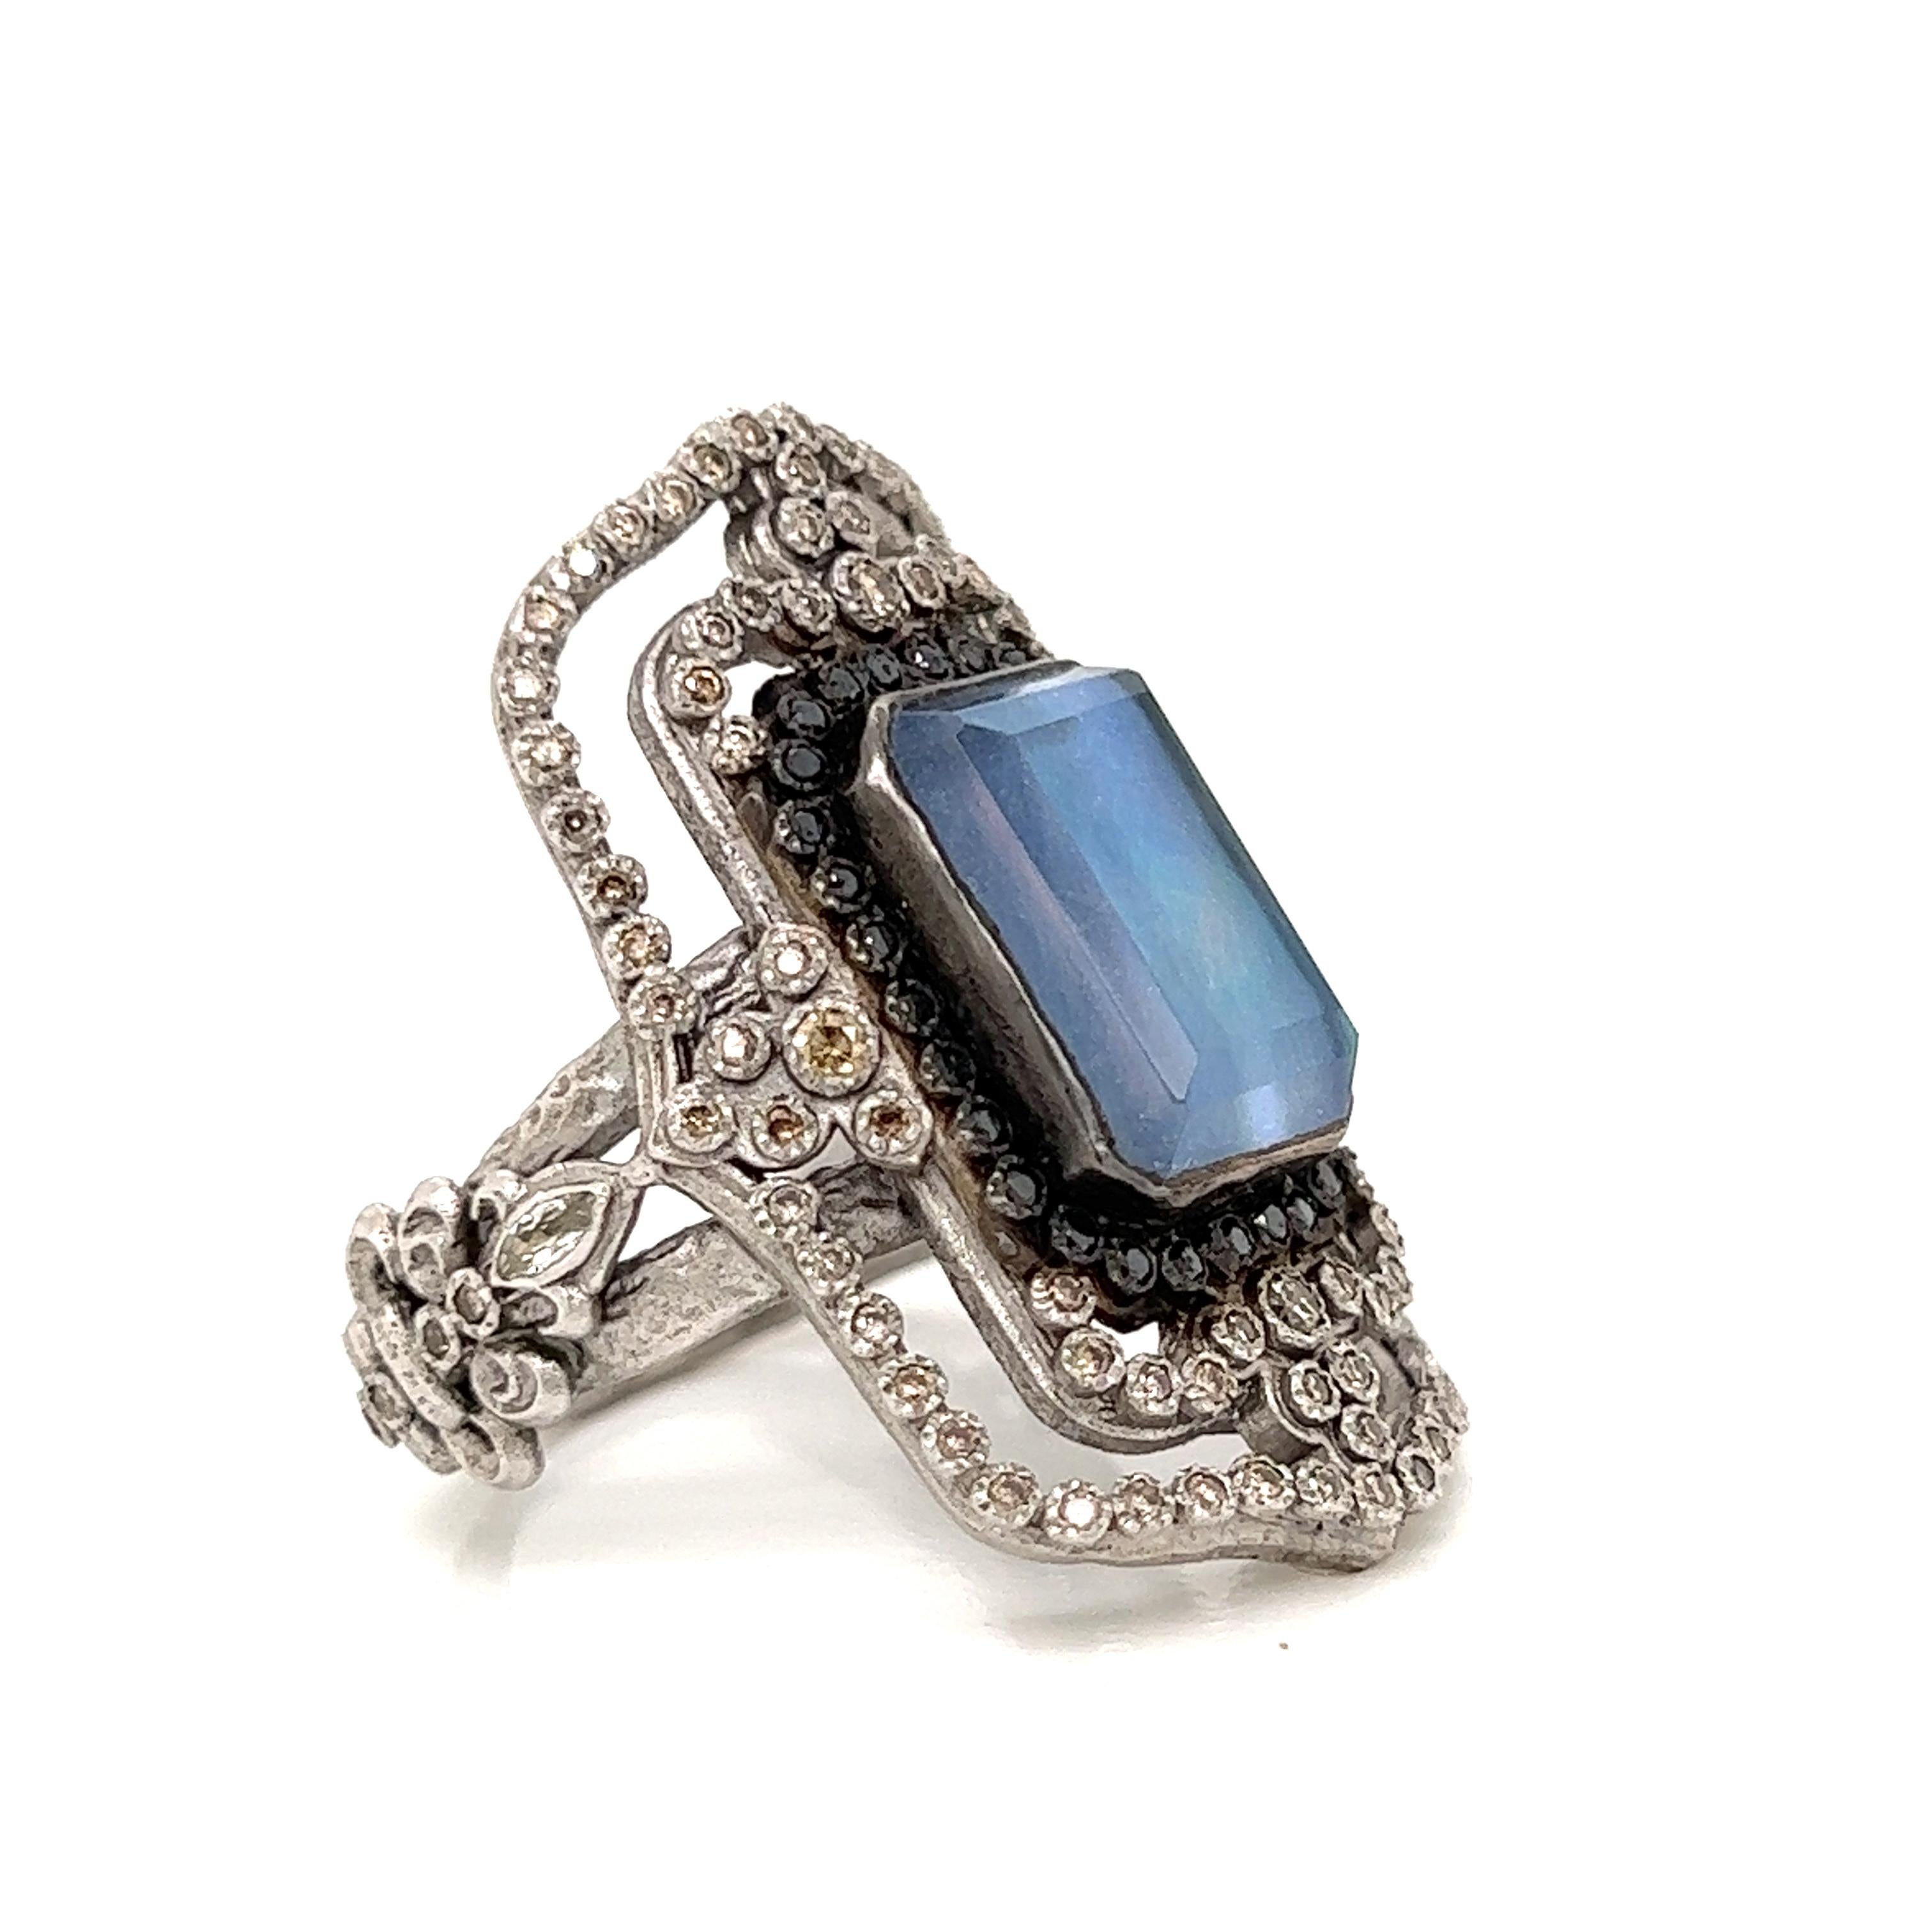 This Armenta ring makes a statement! Gorgeous attention to detail and styling with a vintage vibe. A large blue-gray-aqua mother of pearl sapphire is accented with black, champagne and white diamonds.  This is a US size 6 and can be sized. Set in